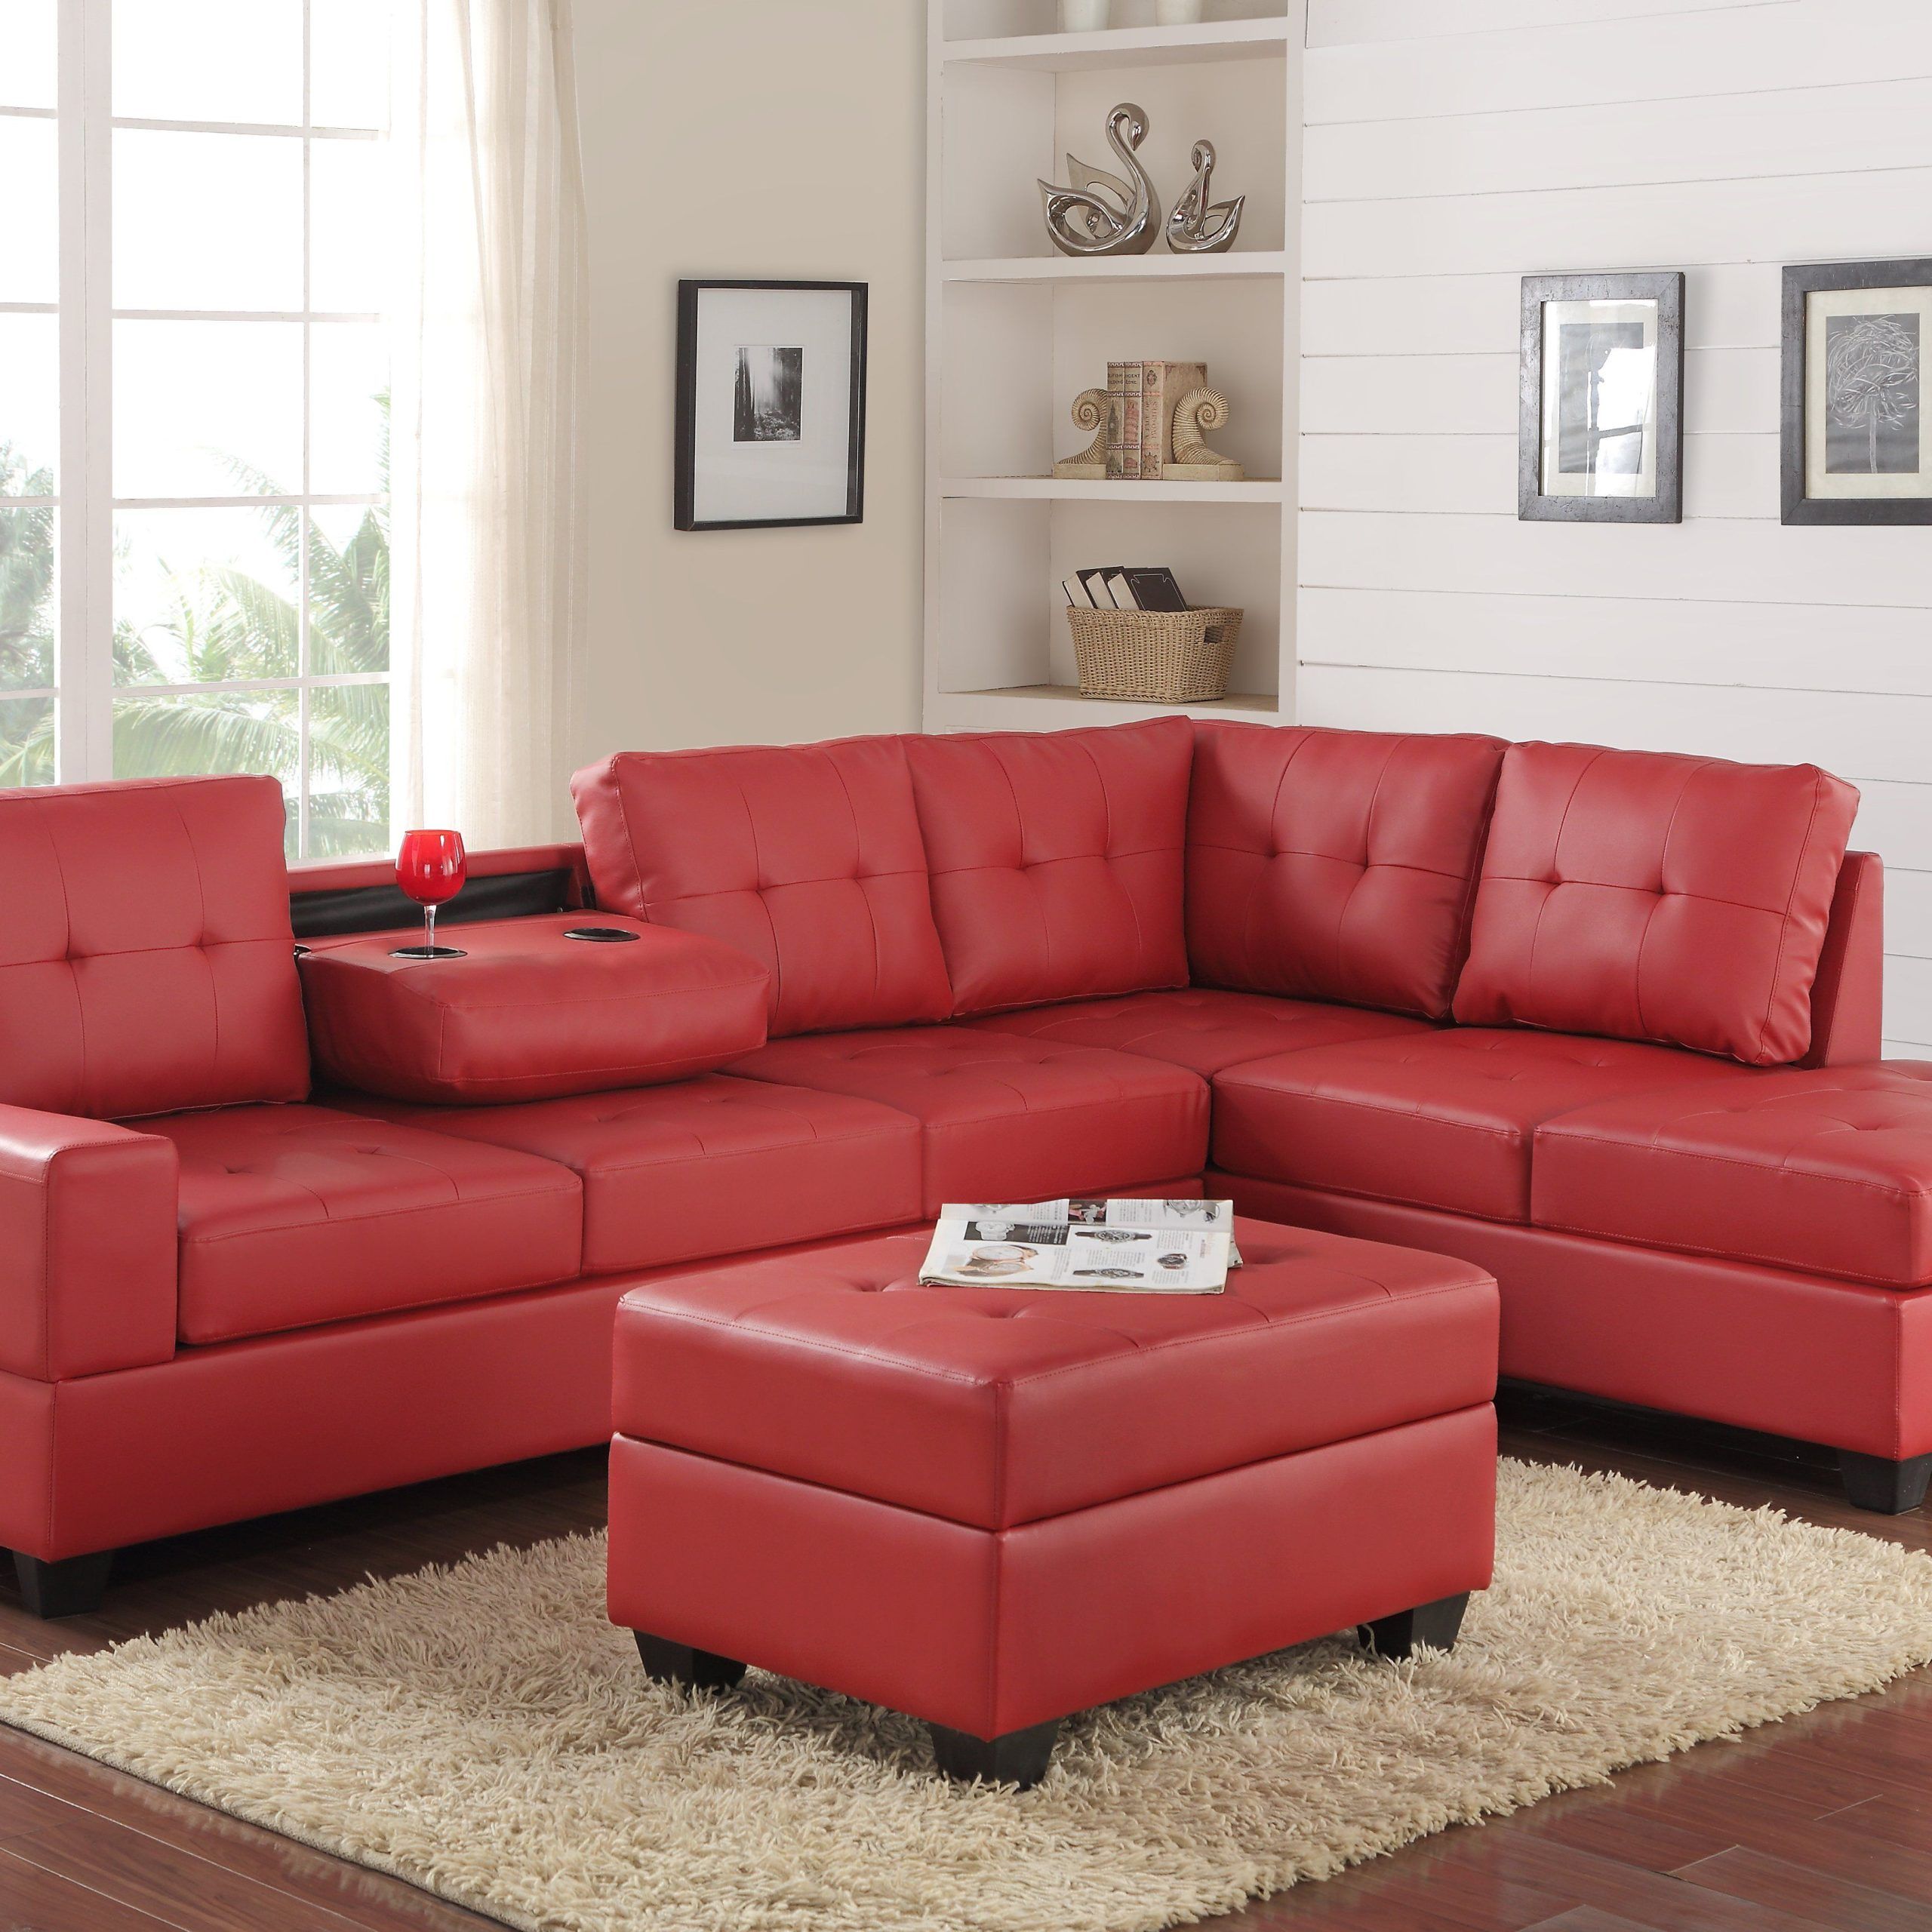 Heights Faux Leather Reversible Sectional With Storage Ottoman With Regard To Faux Leather Sectional Sofa Sets (Gallery 9 of 21)